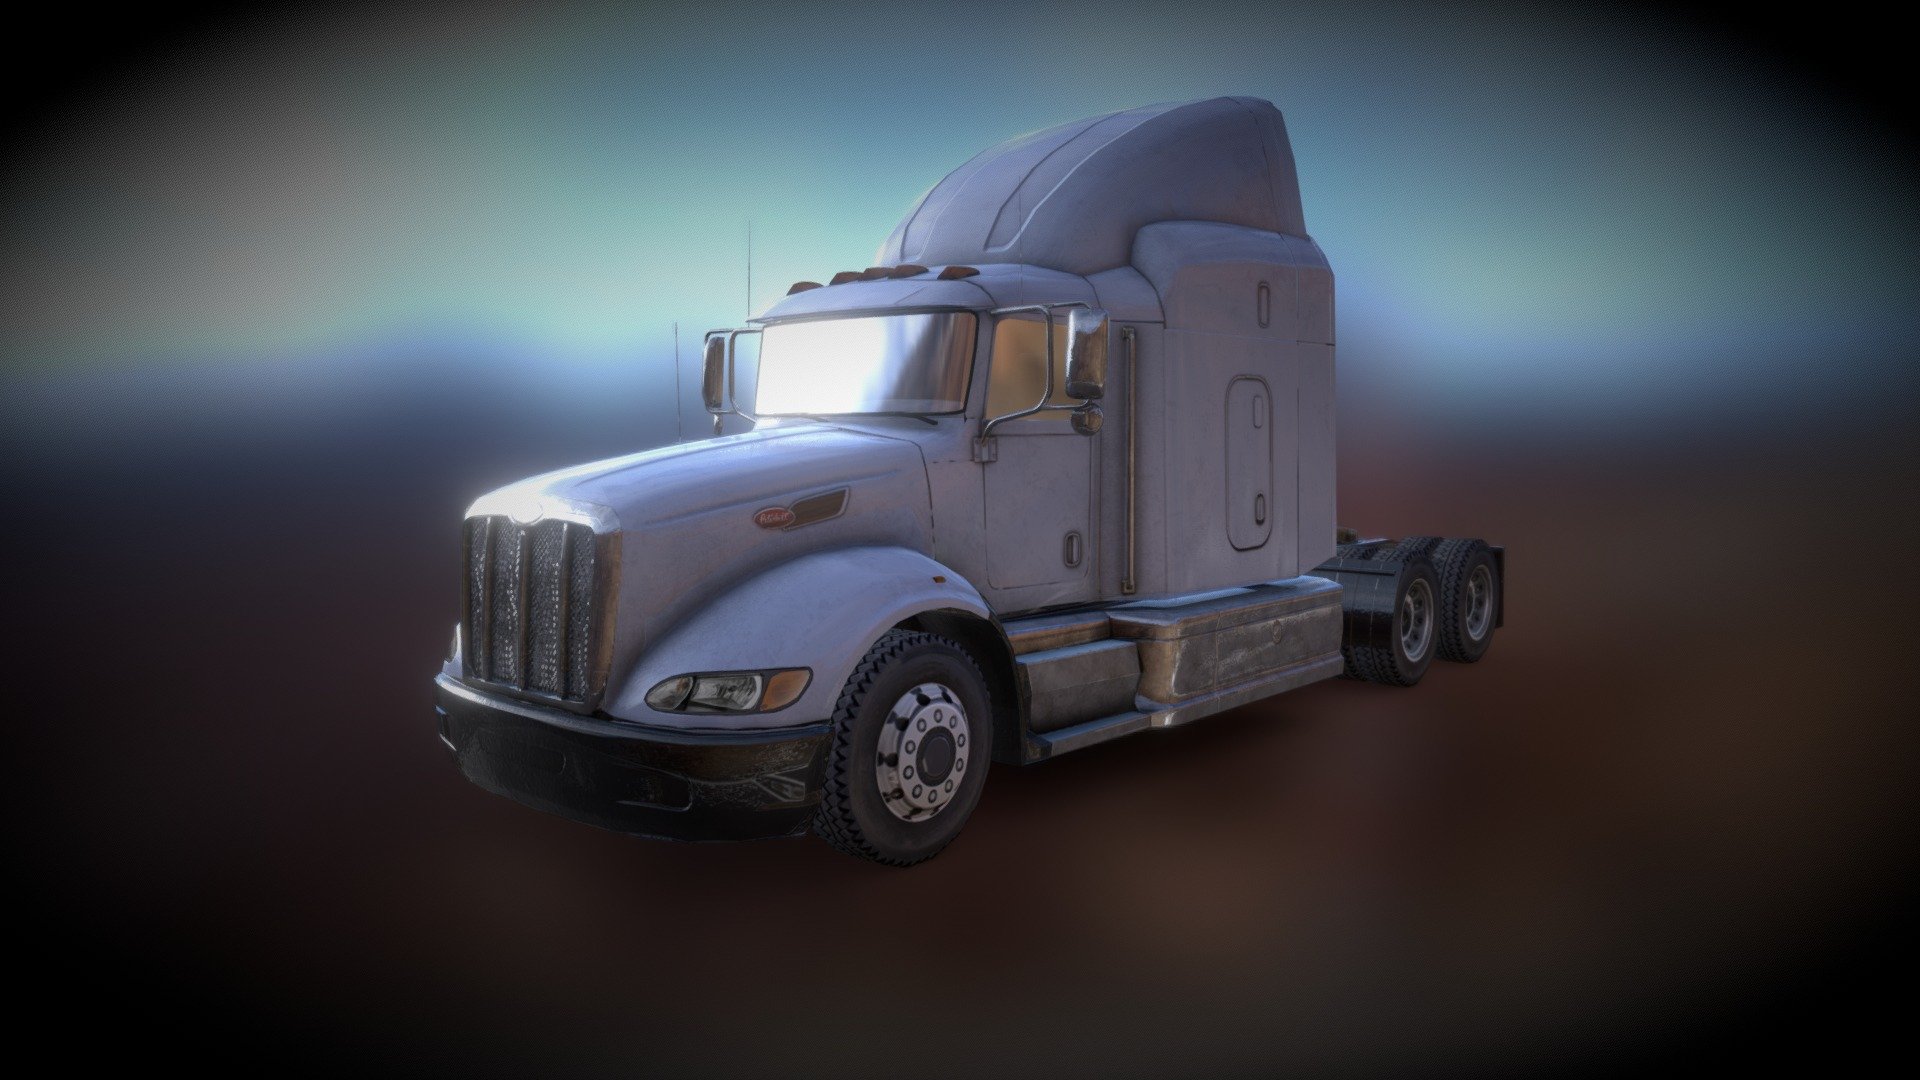 New Drivable Cab for driver training simulation. Working doors, lights, with detailed interior baked in with substance. Low poly model perfect for simulation with high detail exterior 3d model